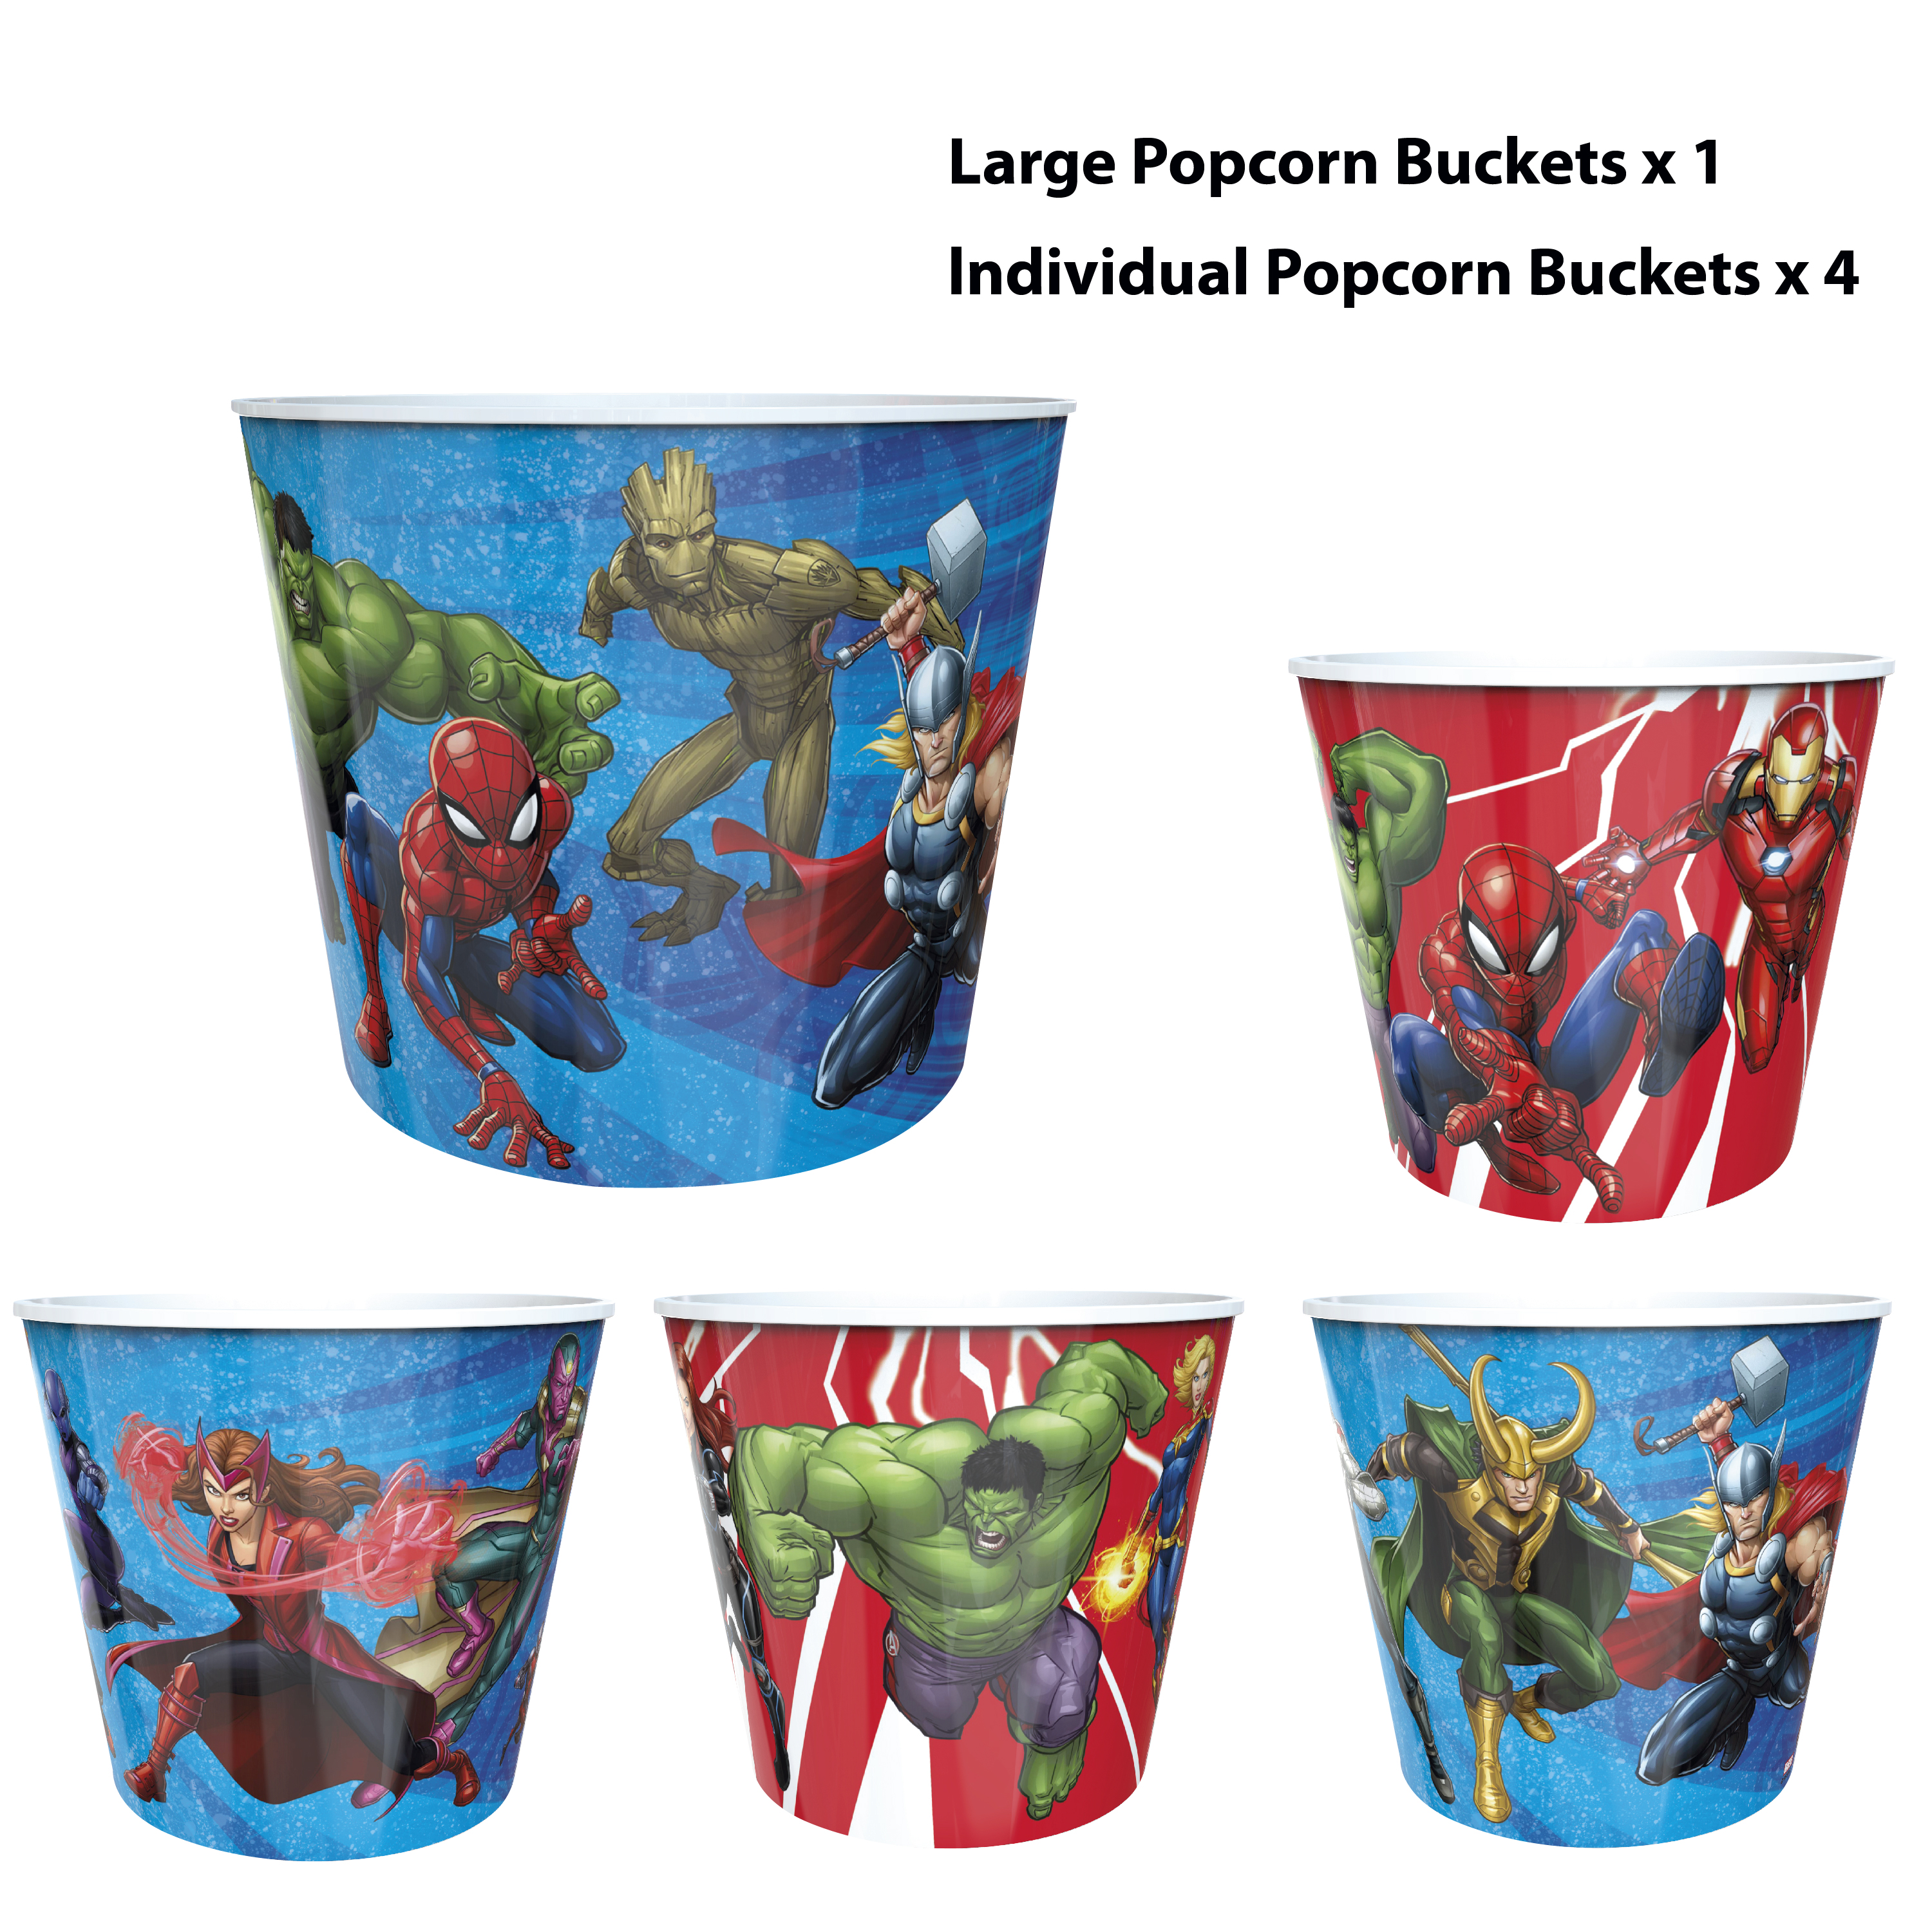 Marvel Comics Plastic Popcorn Container and Bowls, The Hulk, Spider-Man and More, 5-piece set slideshow image 10